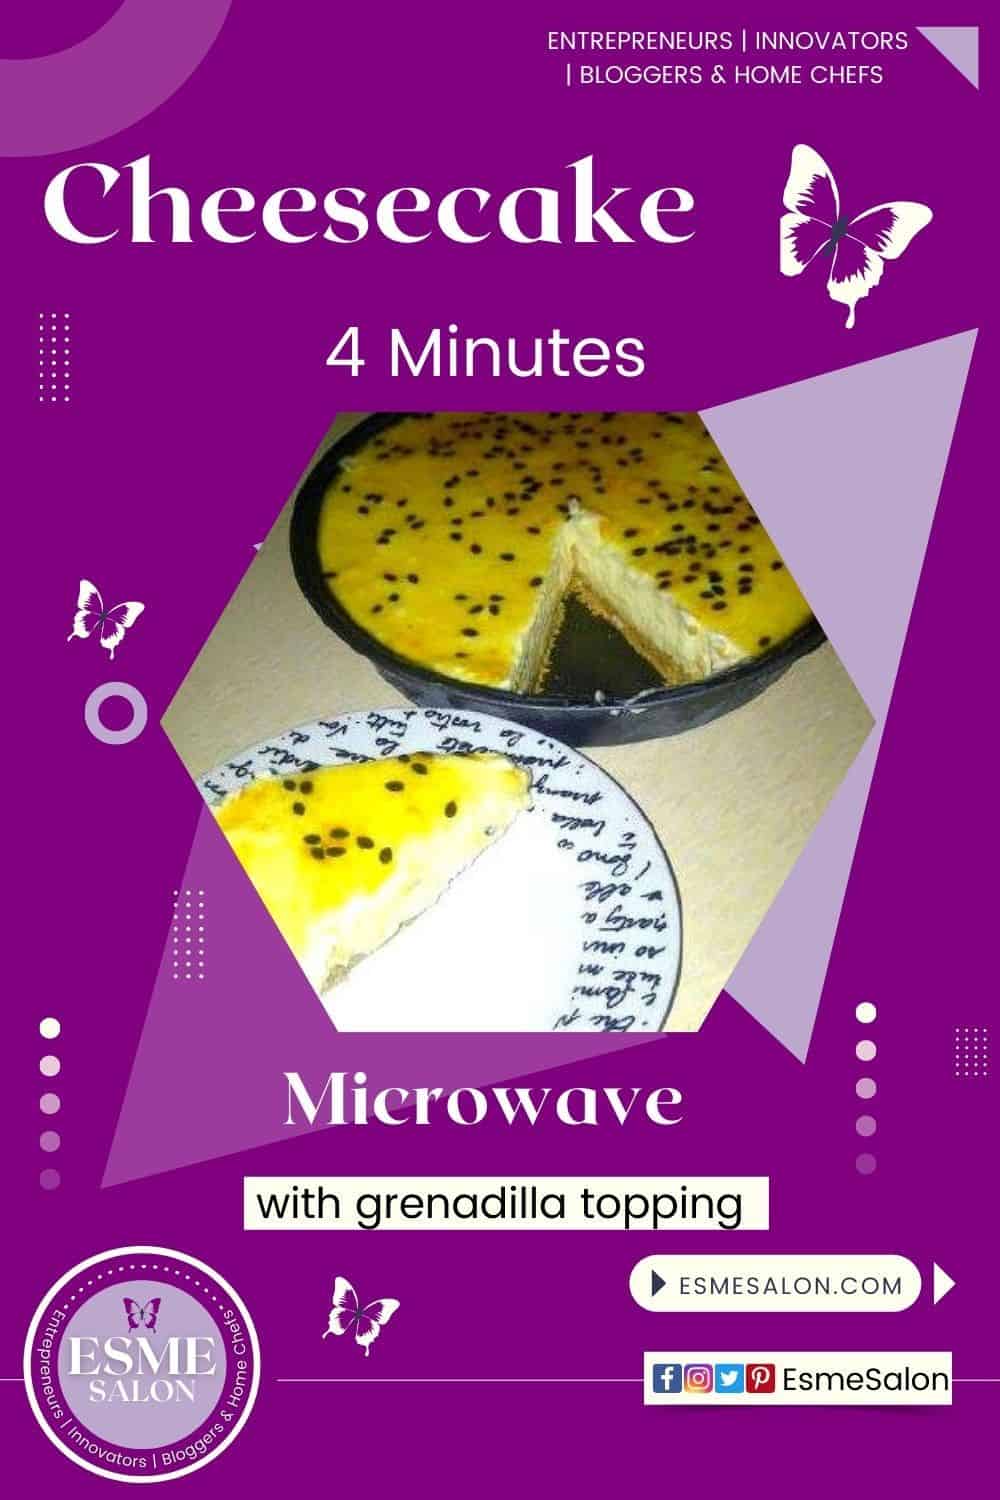 An Easy recipe with awesome results, you should try this 4 Minute Microwave Cheesecake with granadilla topping.